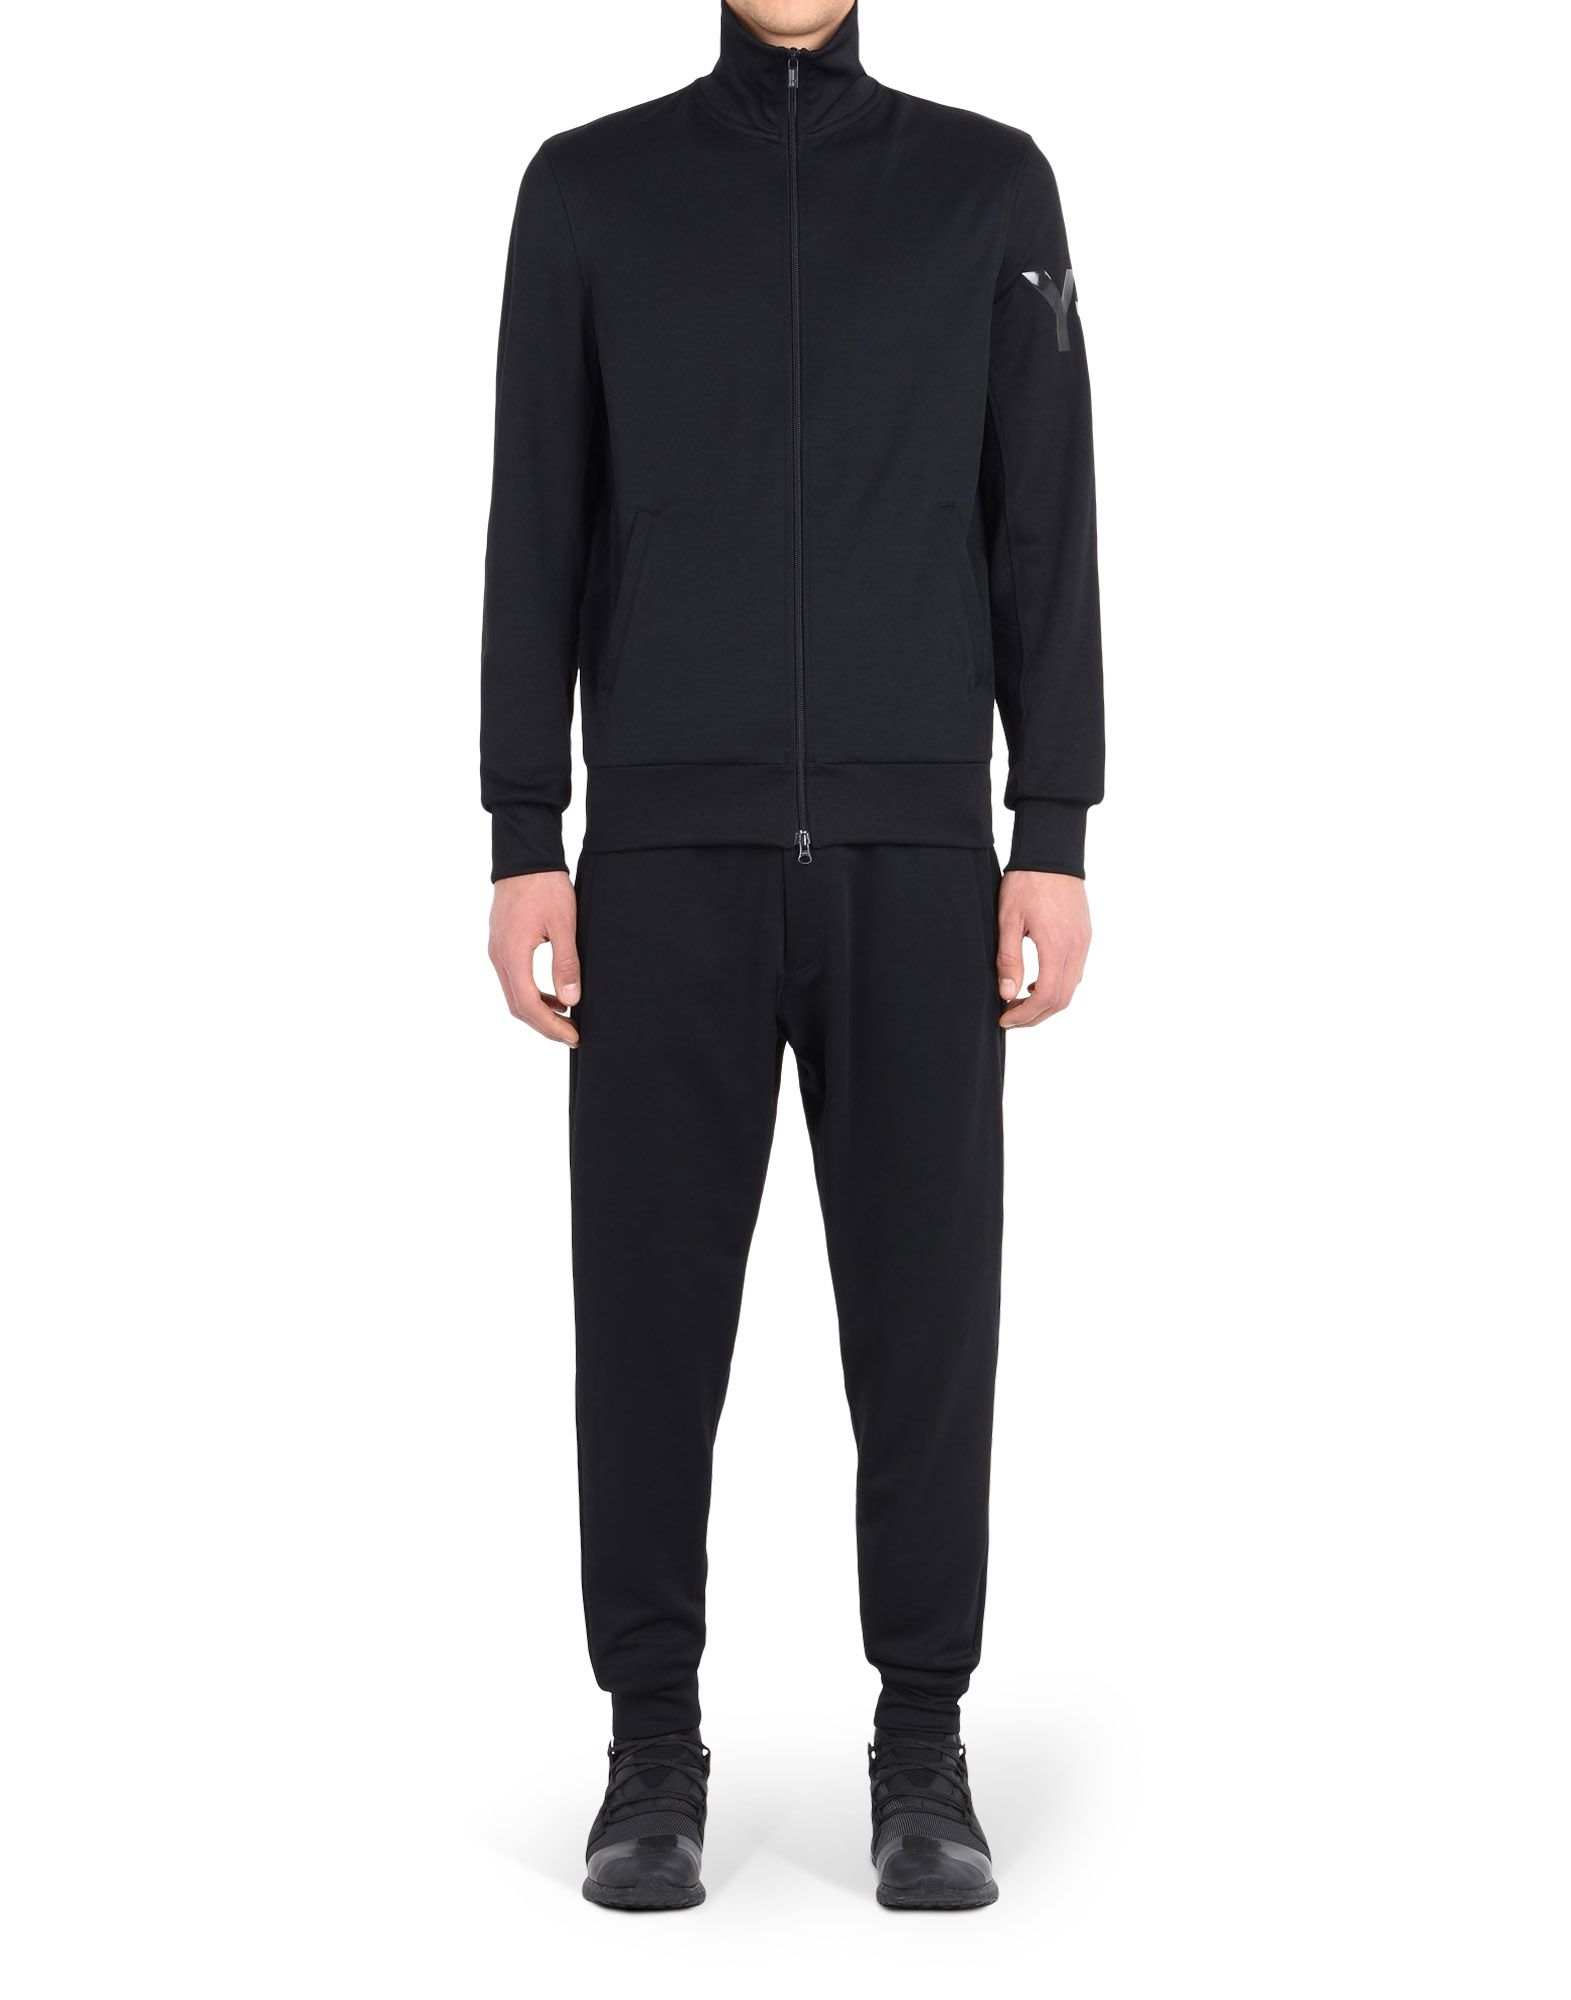 Y 3 Classic Track Pants for Men | Adidas Y-3 Official Store